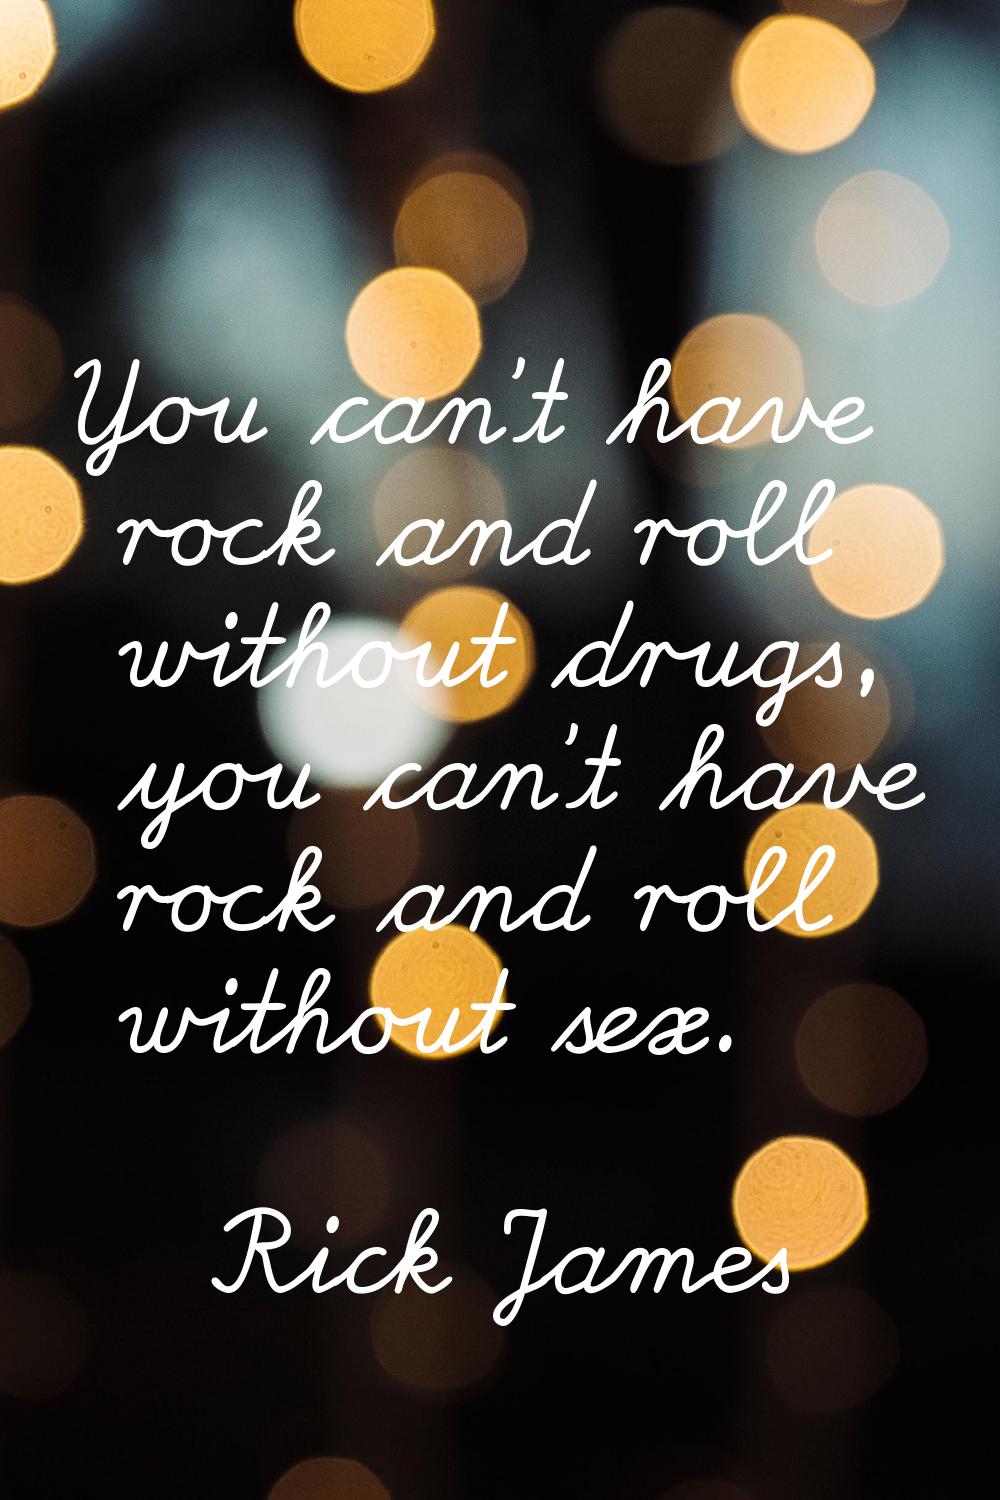 You can't have rock and roll without drugs, you can't have rock and roll without sex.